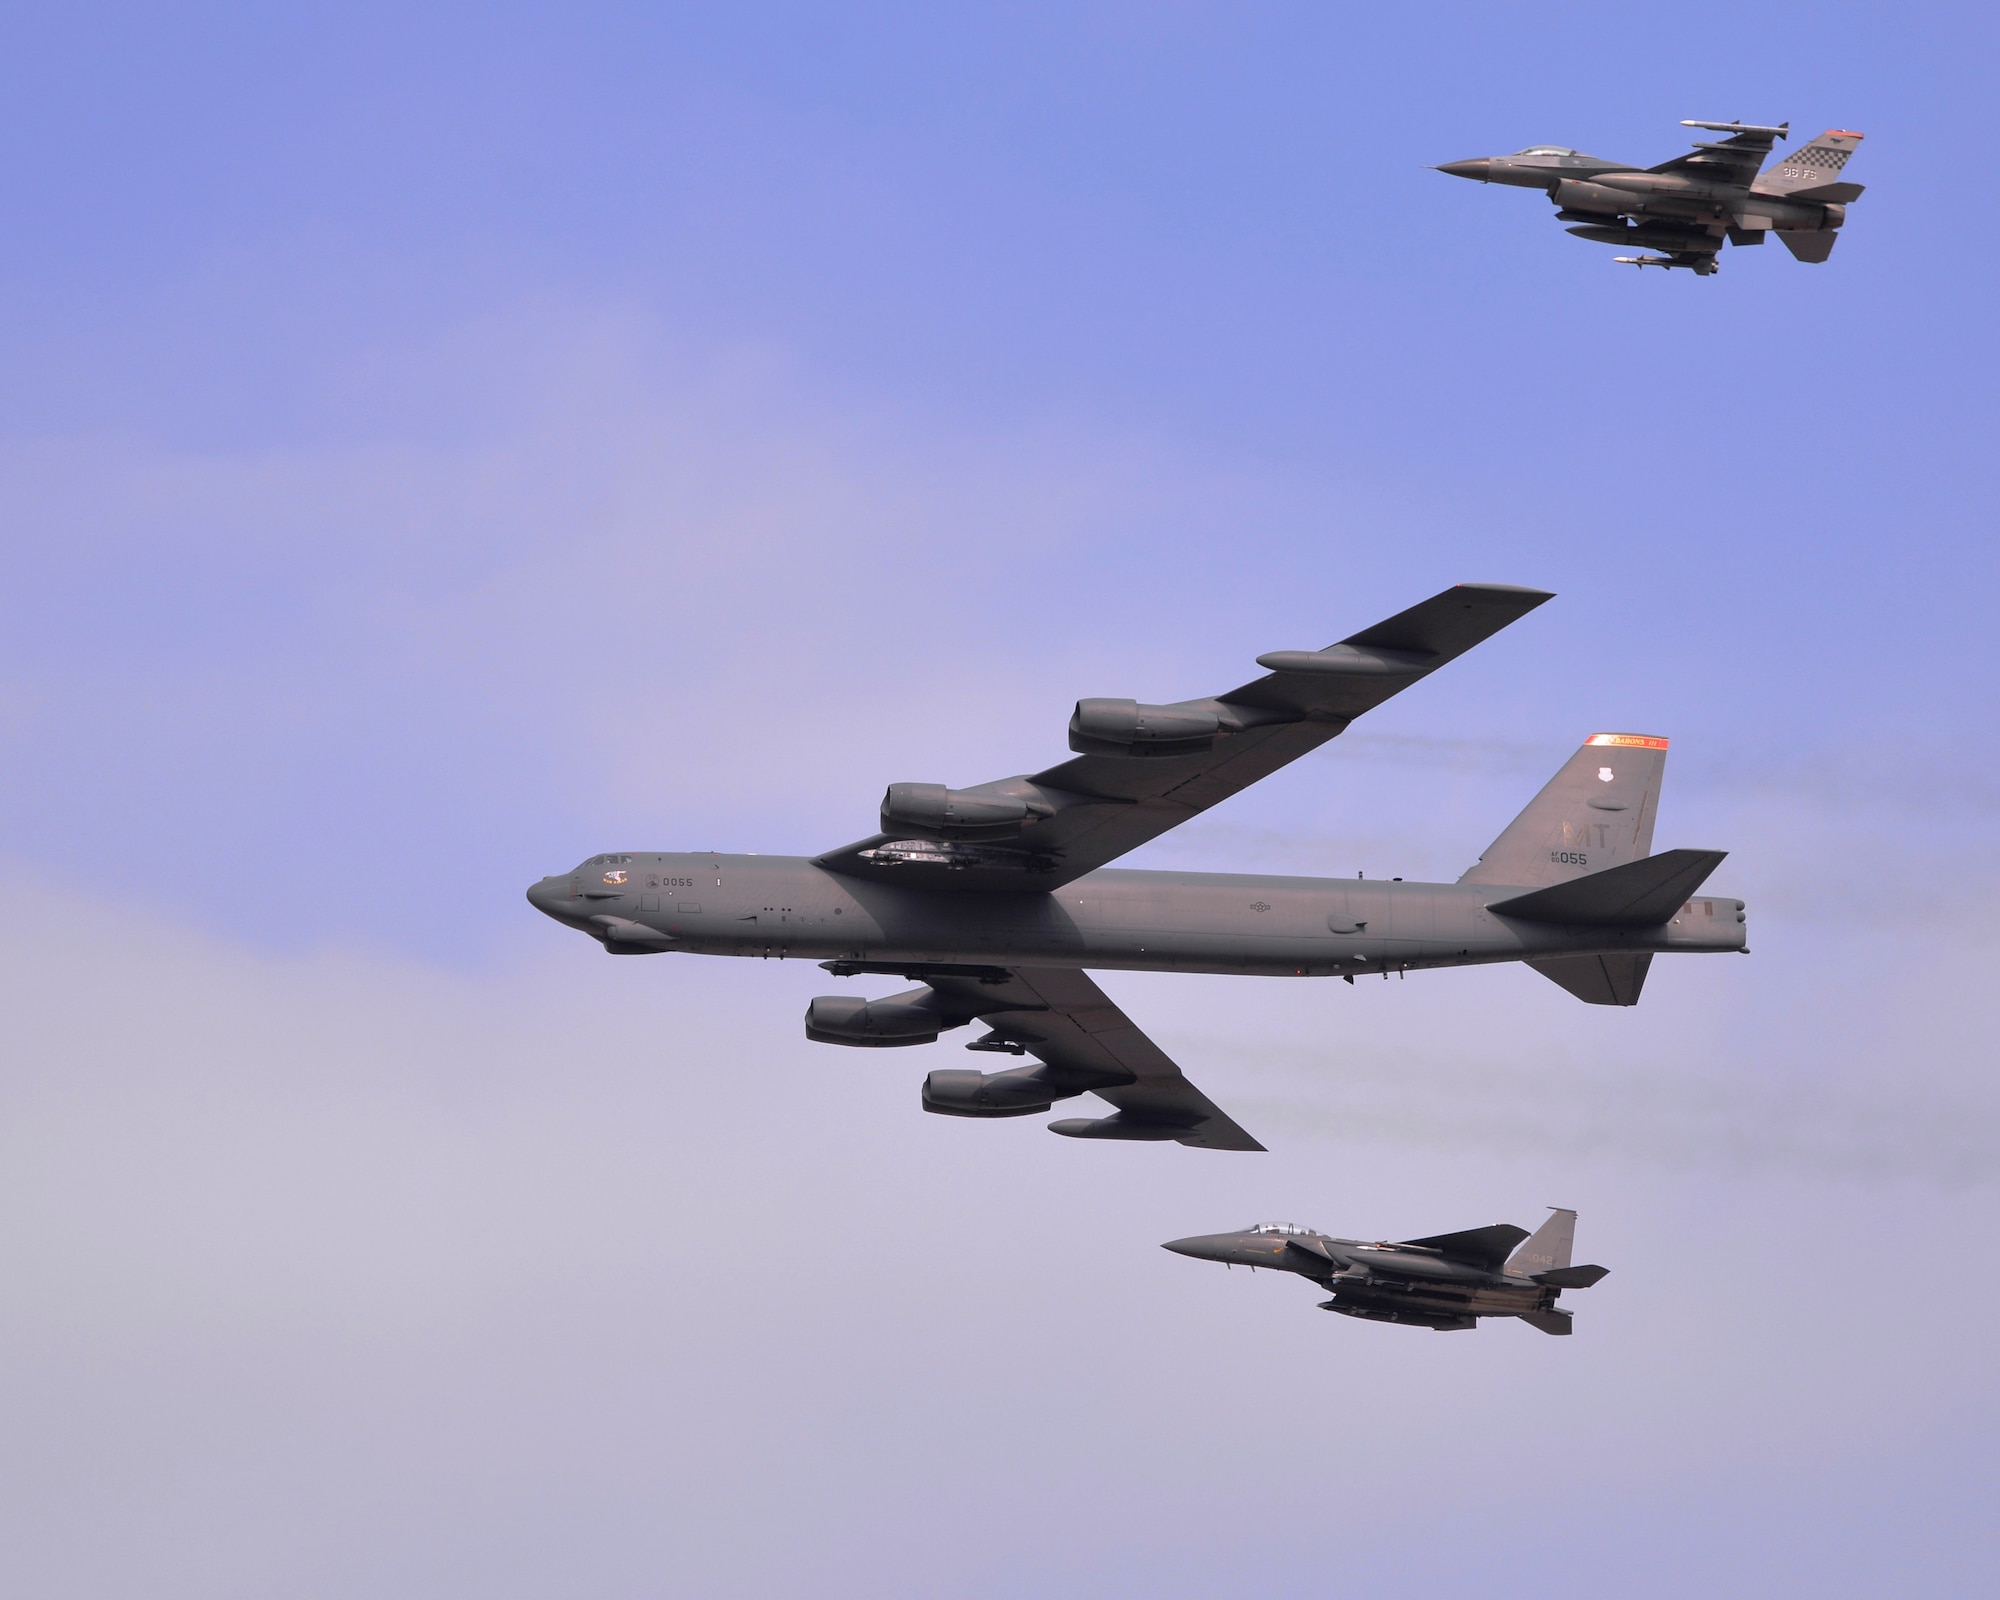 A U.S. Air Force B-52 Stratofortress from Andersen Air Force Base, Guam, conducted a low-level flight in the vicinity of Osan Air Base, South Korea, in response to recent provocative action by North Korea Jan. 10, 2016. The B-52 was joined by a ROKAF F-15K Slam Eagle and a U.S. Air Force F-16 Fighting Falcon. The B-52 is a is a long-range, heavy bomber that can fly up to 50,000 feet and has the capability to carry 70,000 pounds of nuclear or precision guided conventional ordnance with worldwide precision navigation capability. (U.S. Air Force photo/Staff Sgt. Benjamin Sutton)
